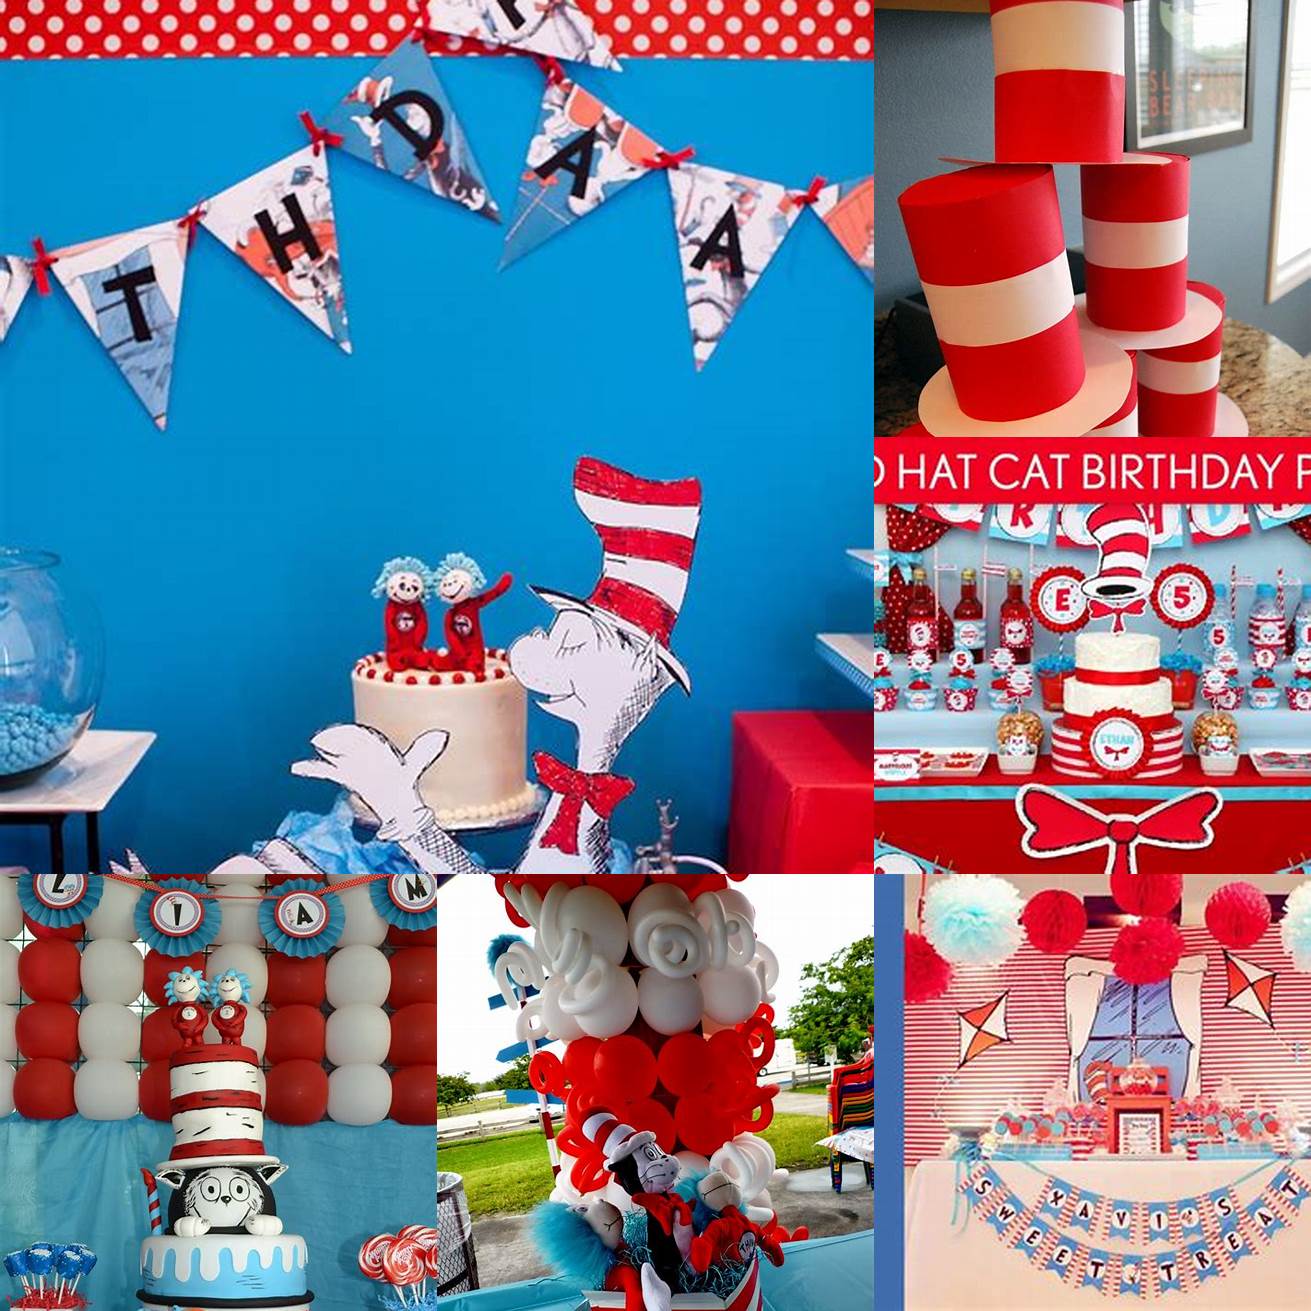 The Cat in the Hat Theme Party